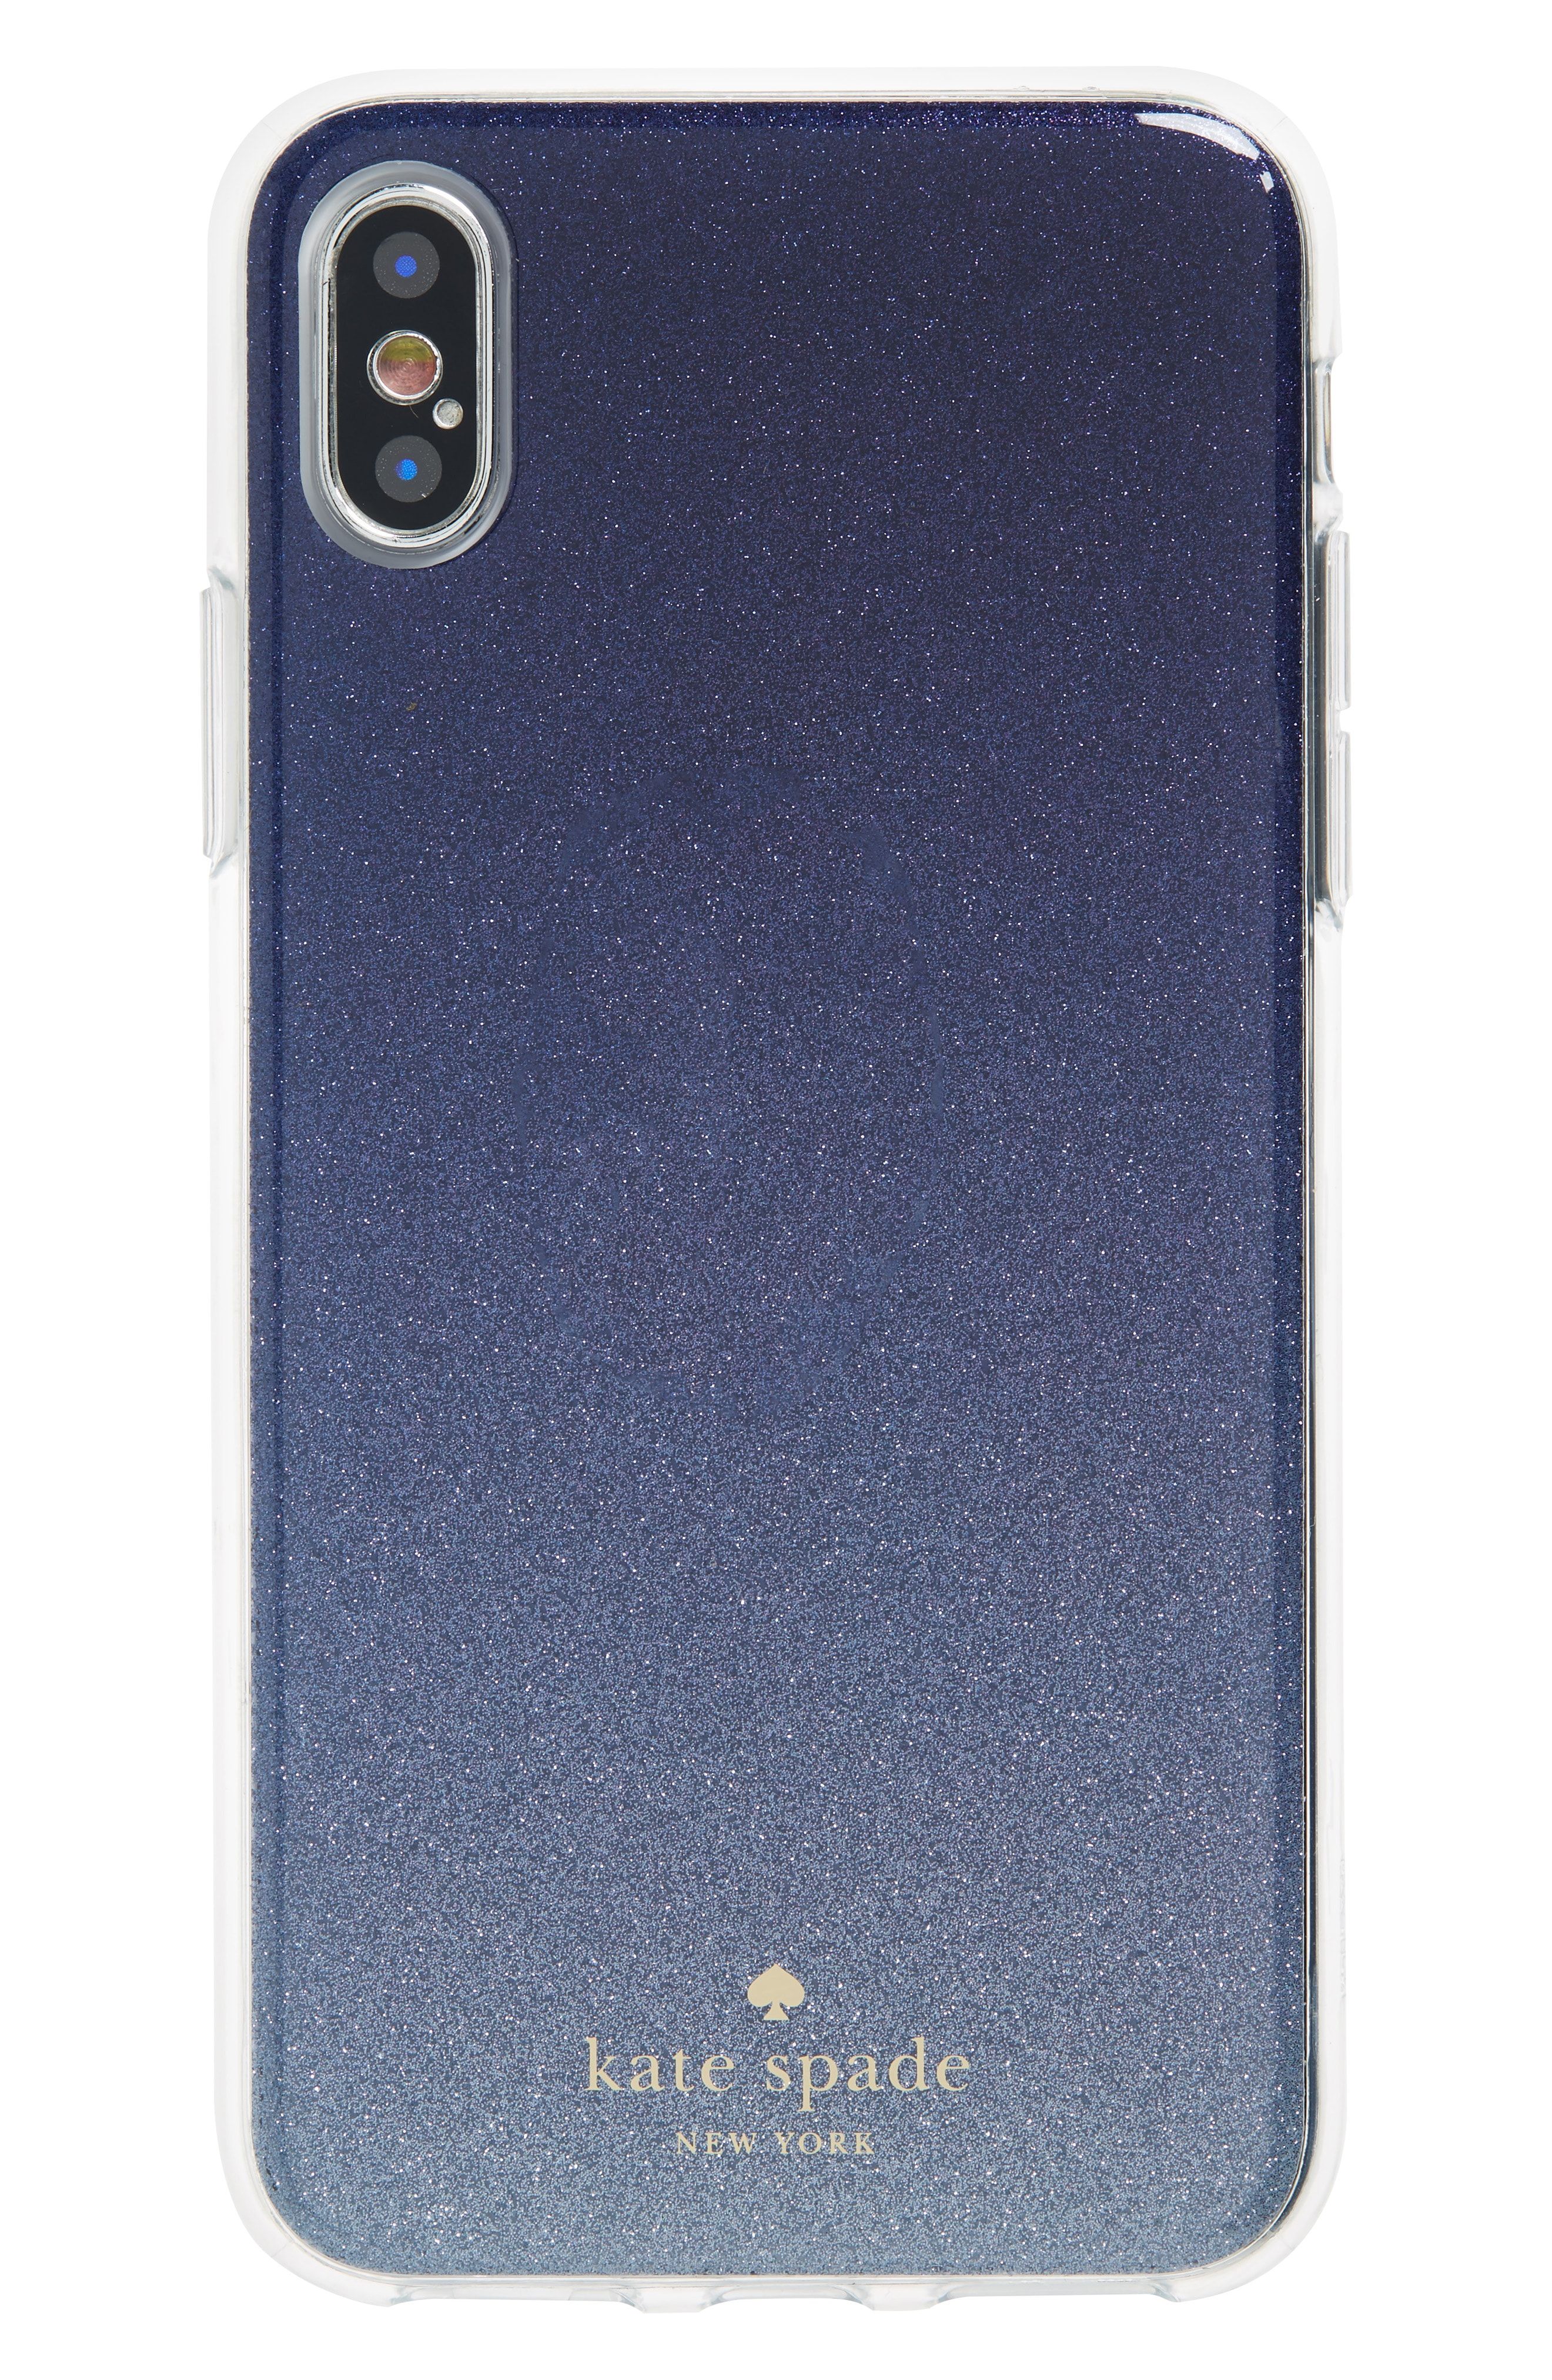 Kate Spade Glitter Ombré Case for iPhone X/Xs